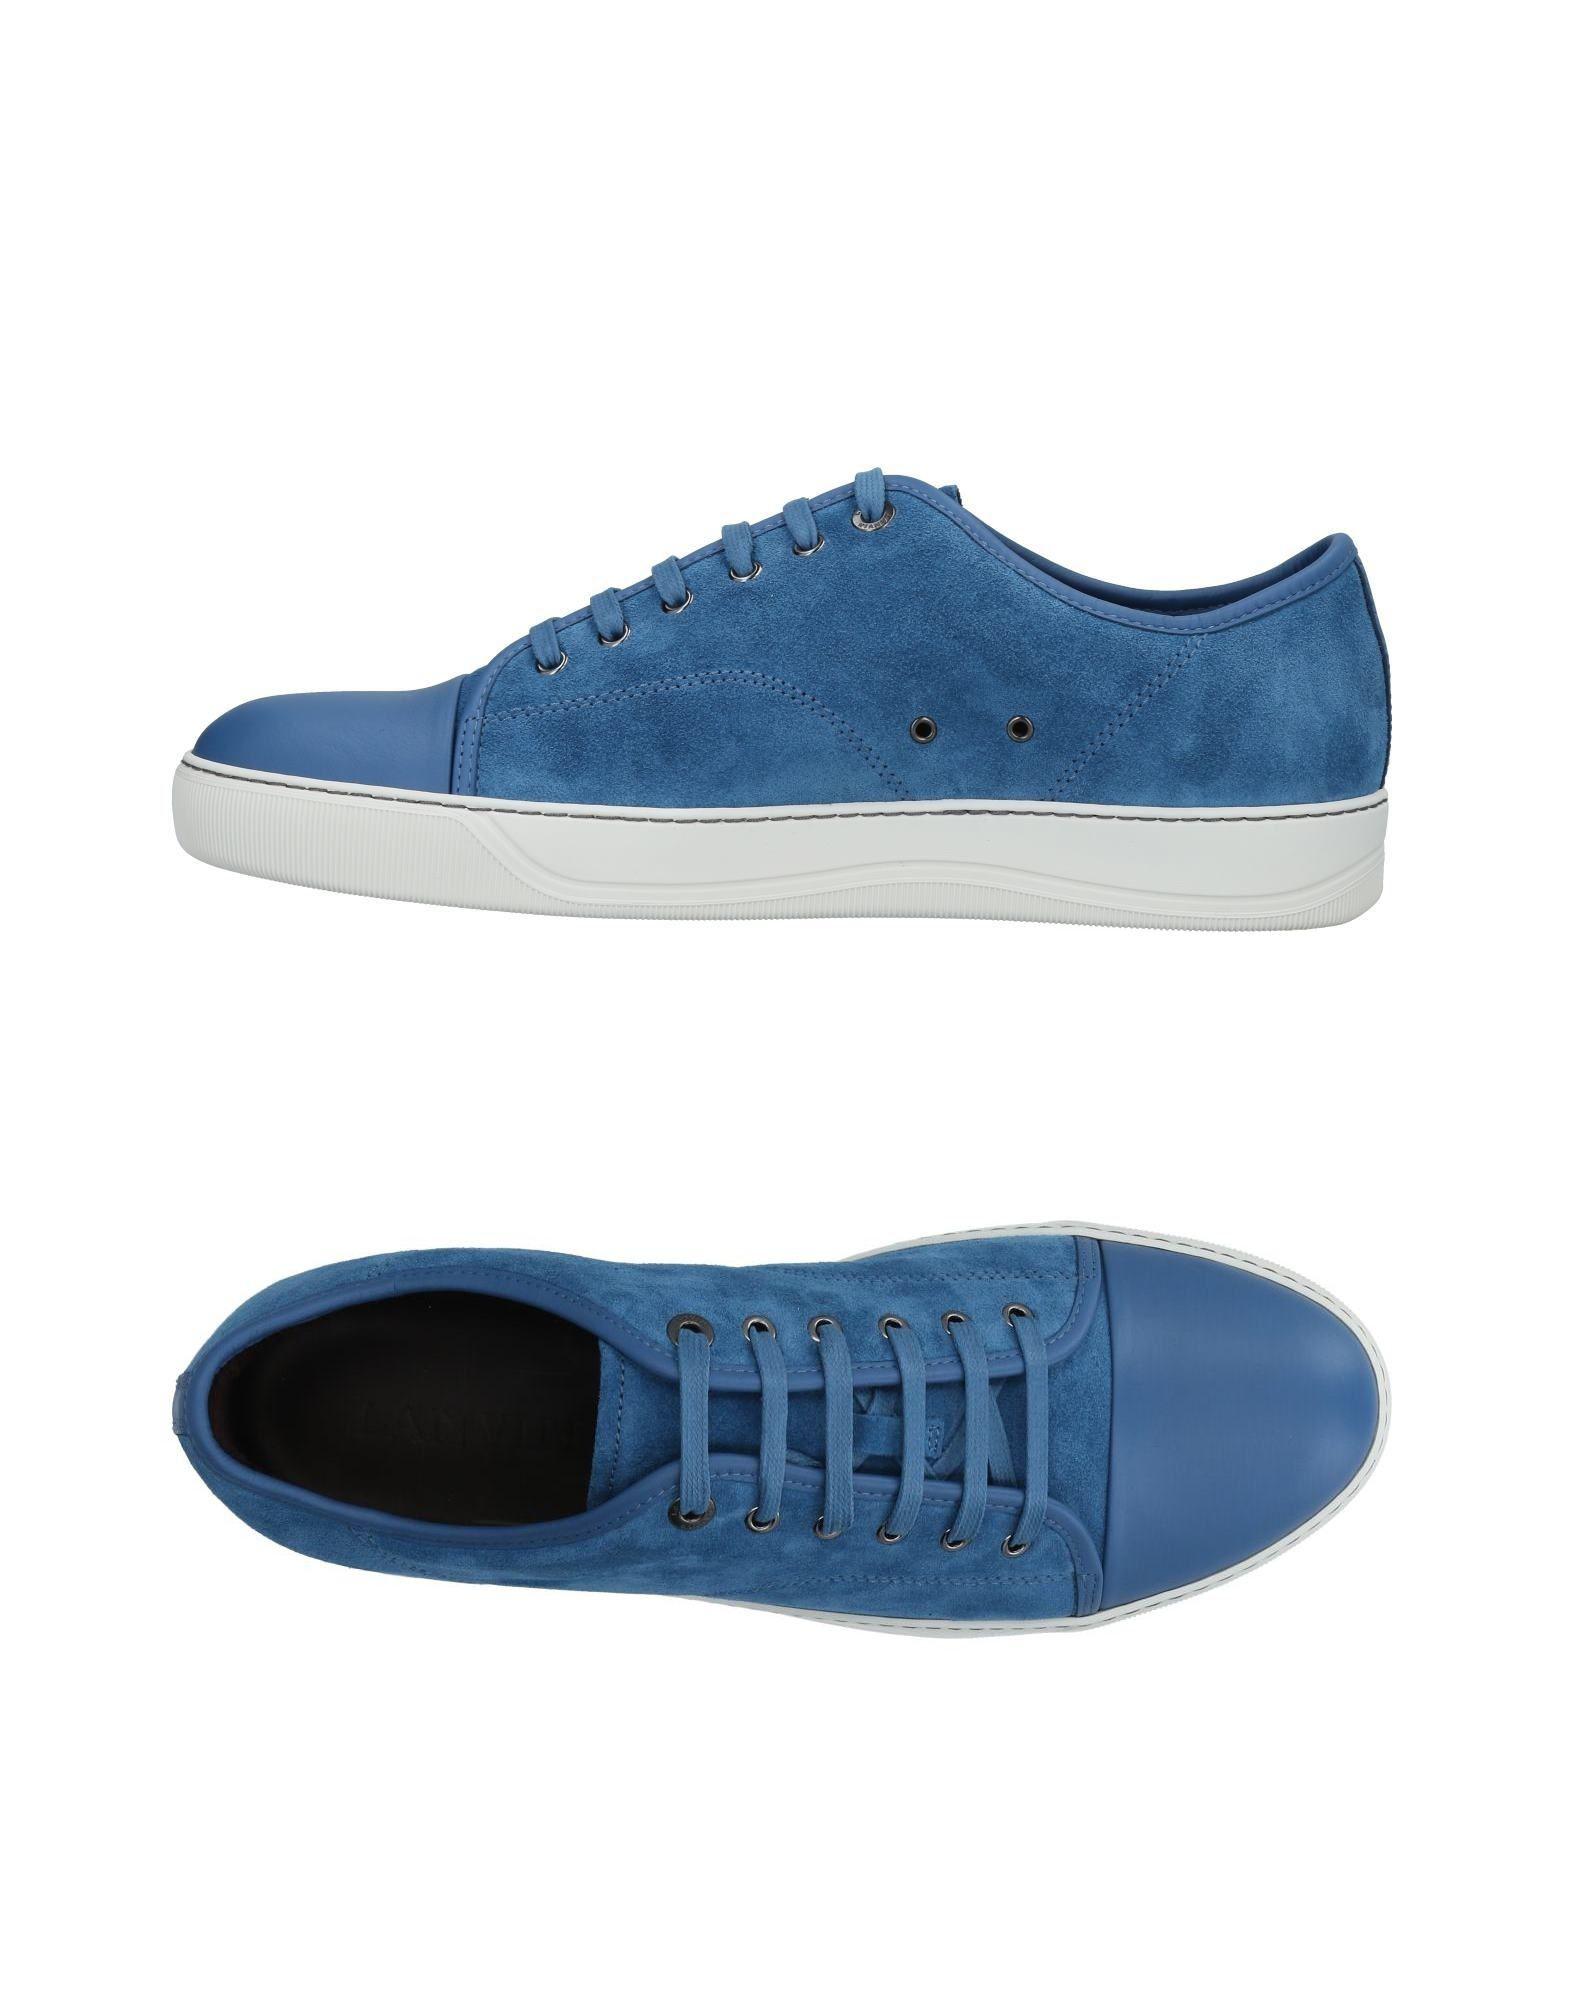 Lanvin Leather Low-tops & Sneakers in Pastel Blue (Blue) for Men - Lyst